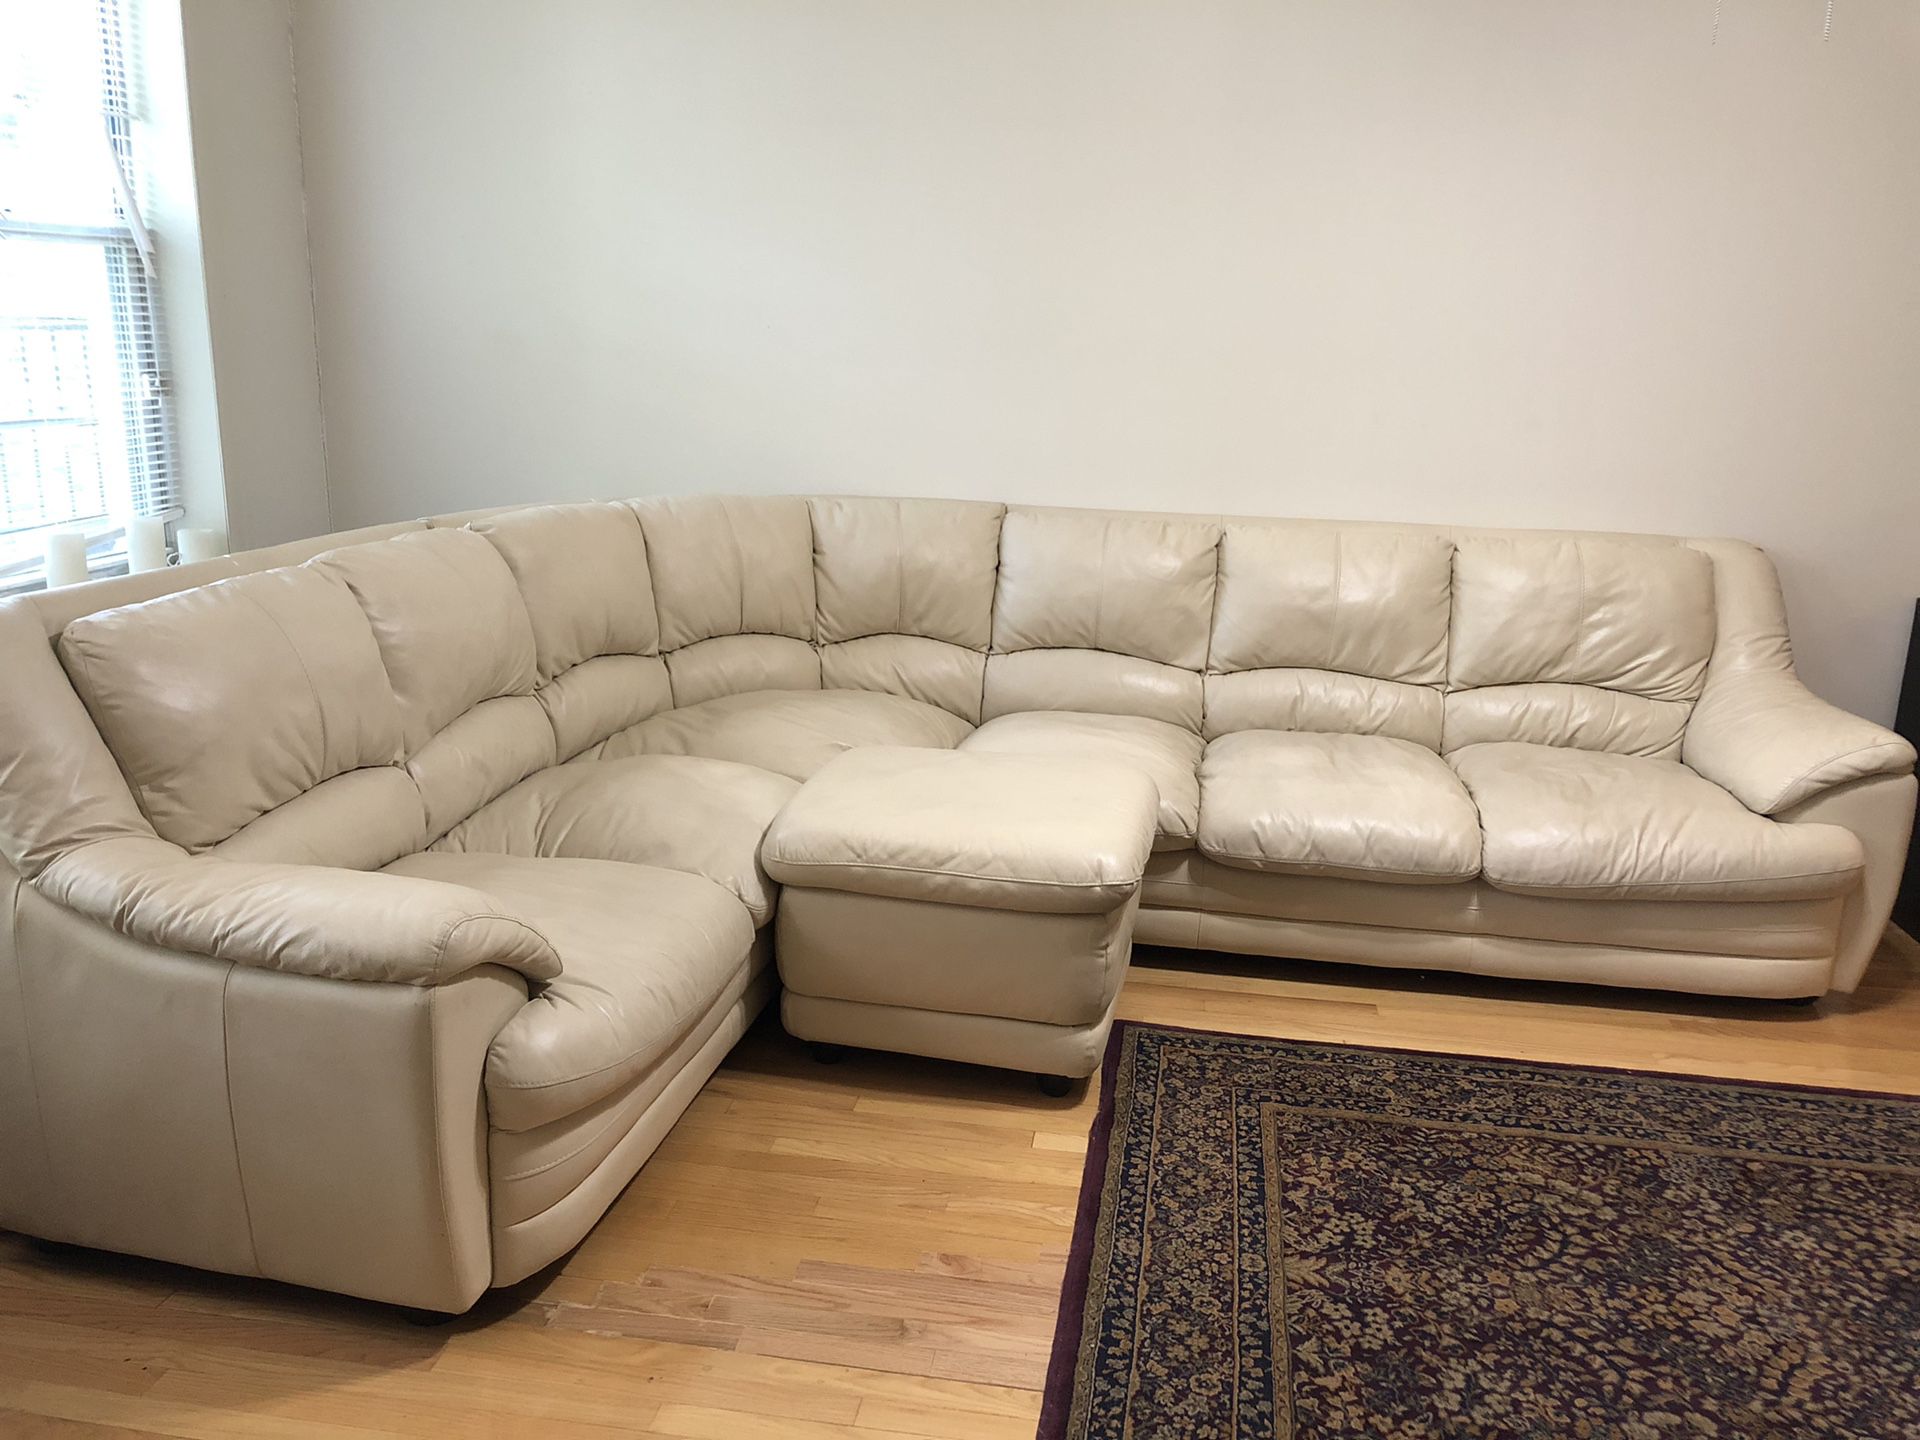 Cream colored 3 piece sectional couch